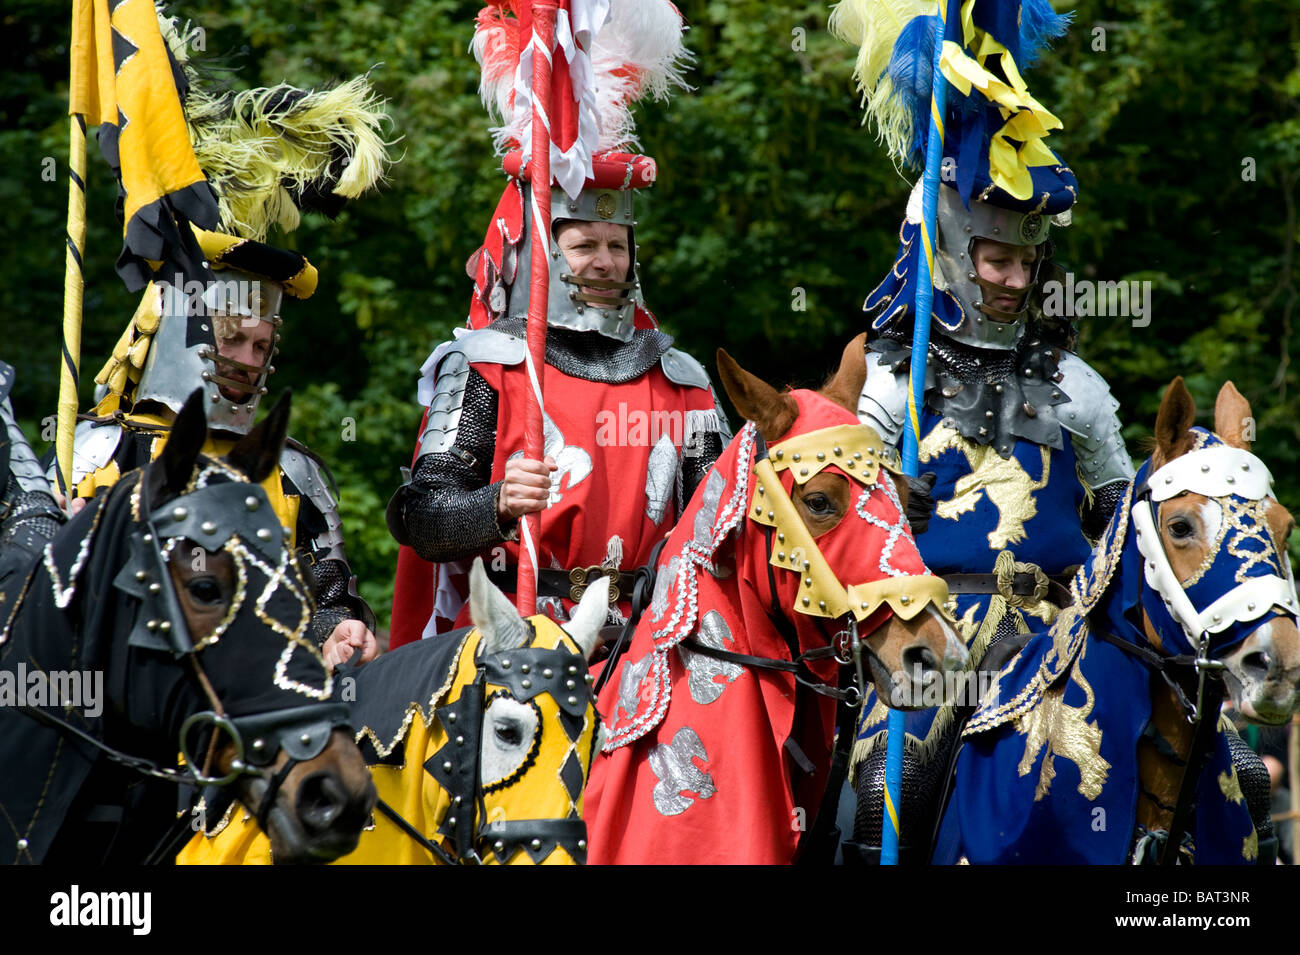 Medieval knights parade prior to battle in Jousting Tournament at Hedingham Castle, Essex, UK Stock Photo